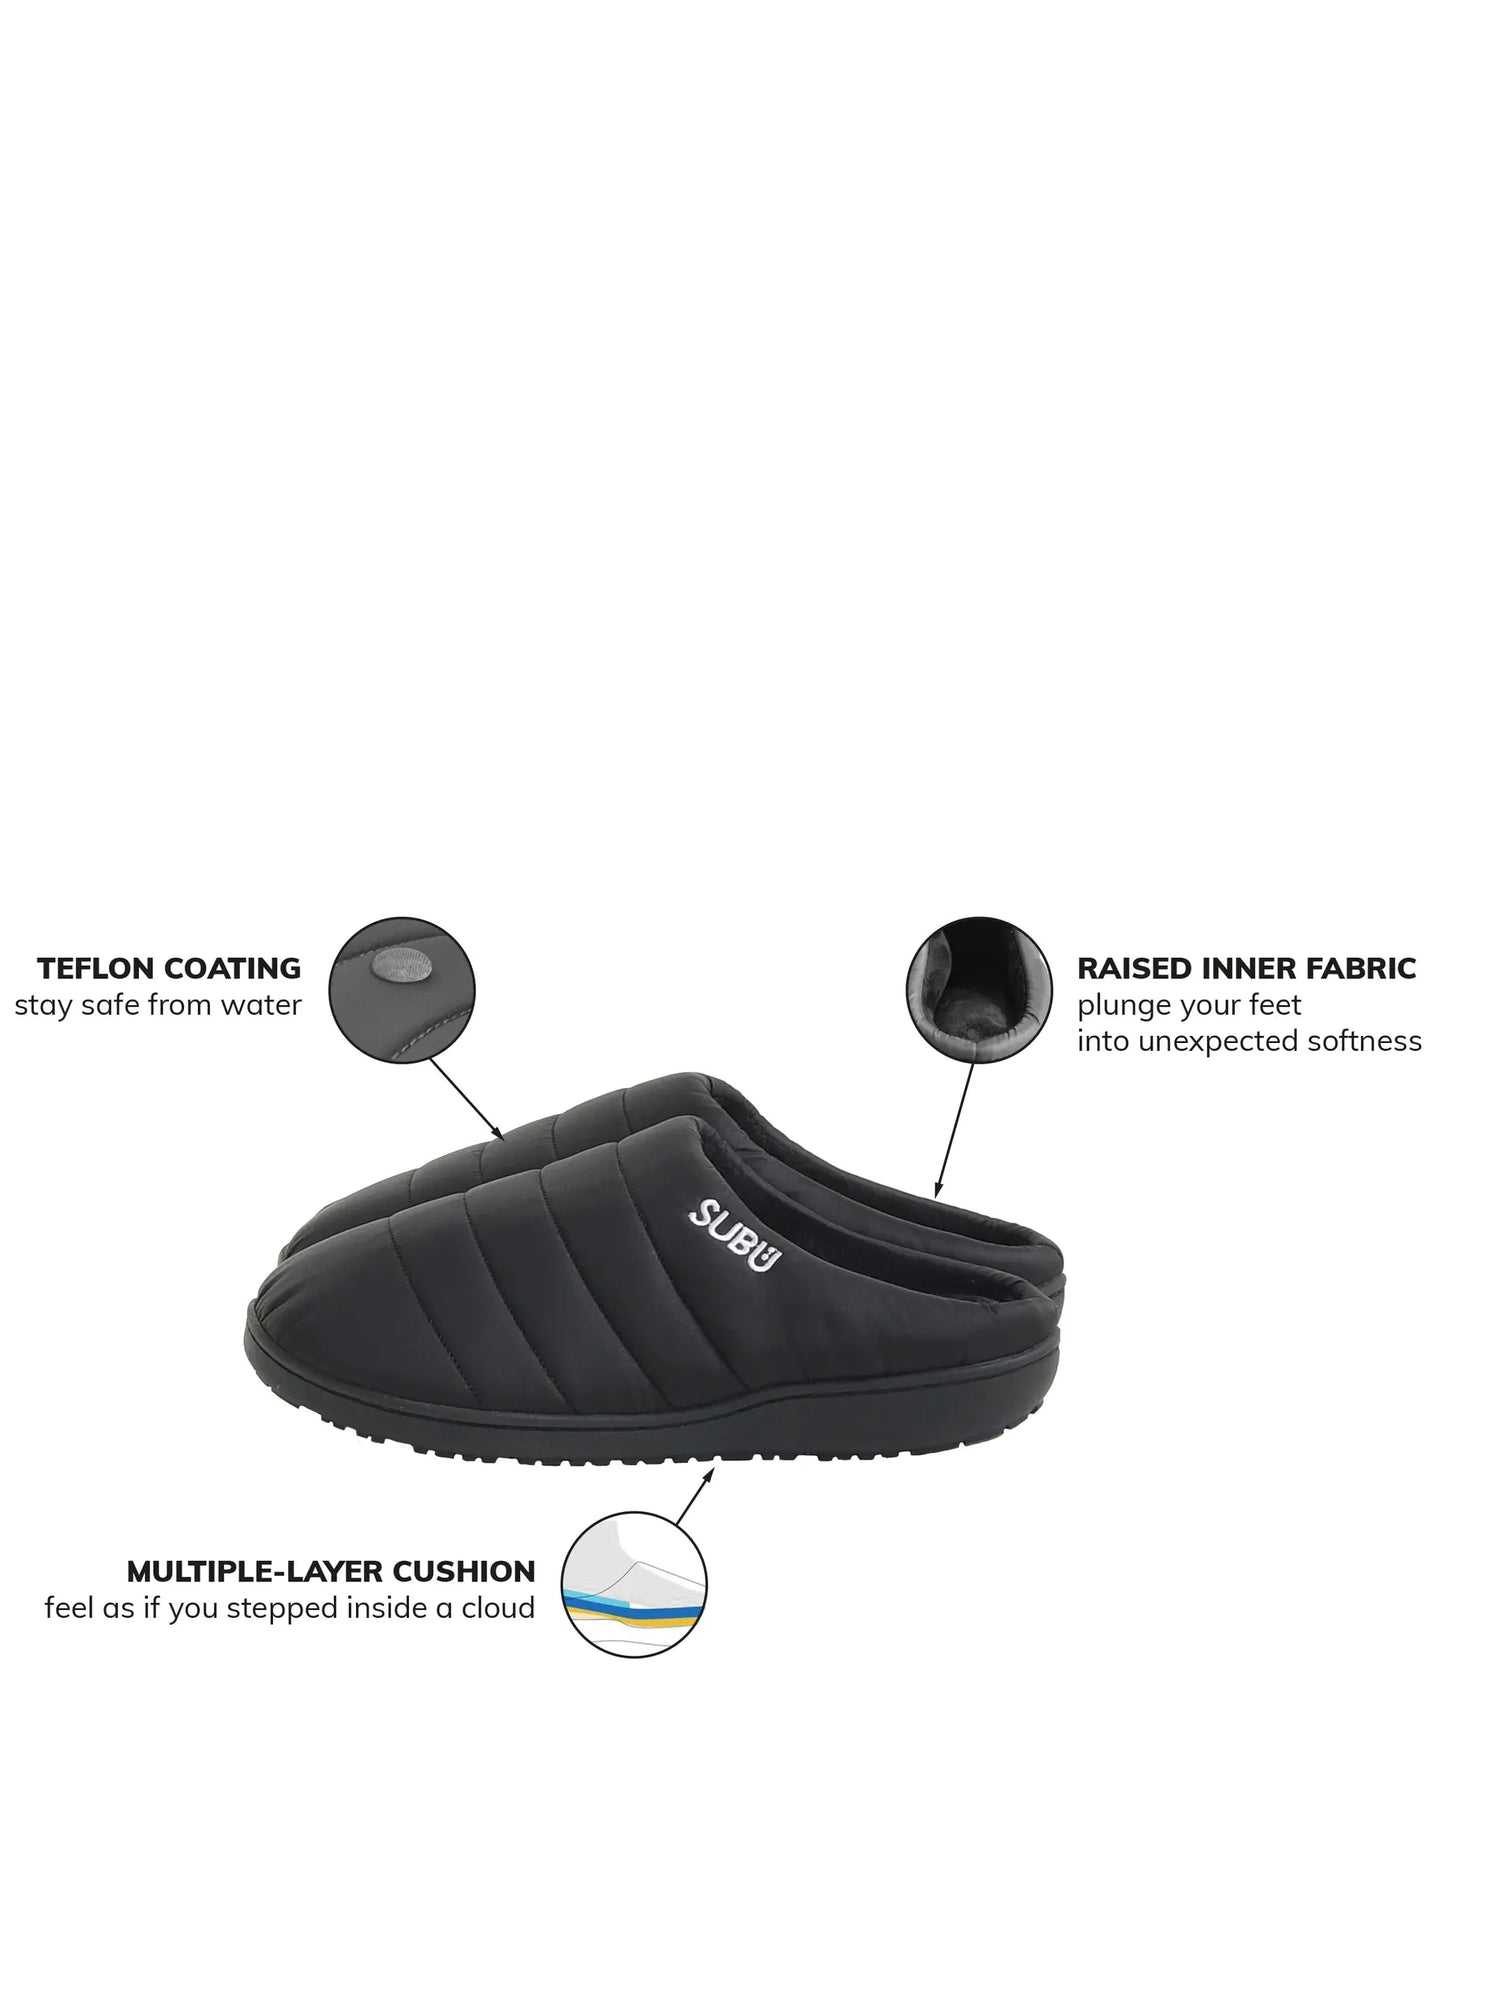 Subu Concept Bumpy Silver Puffer Slippers